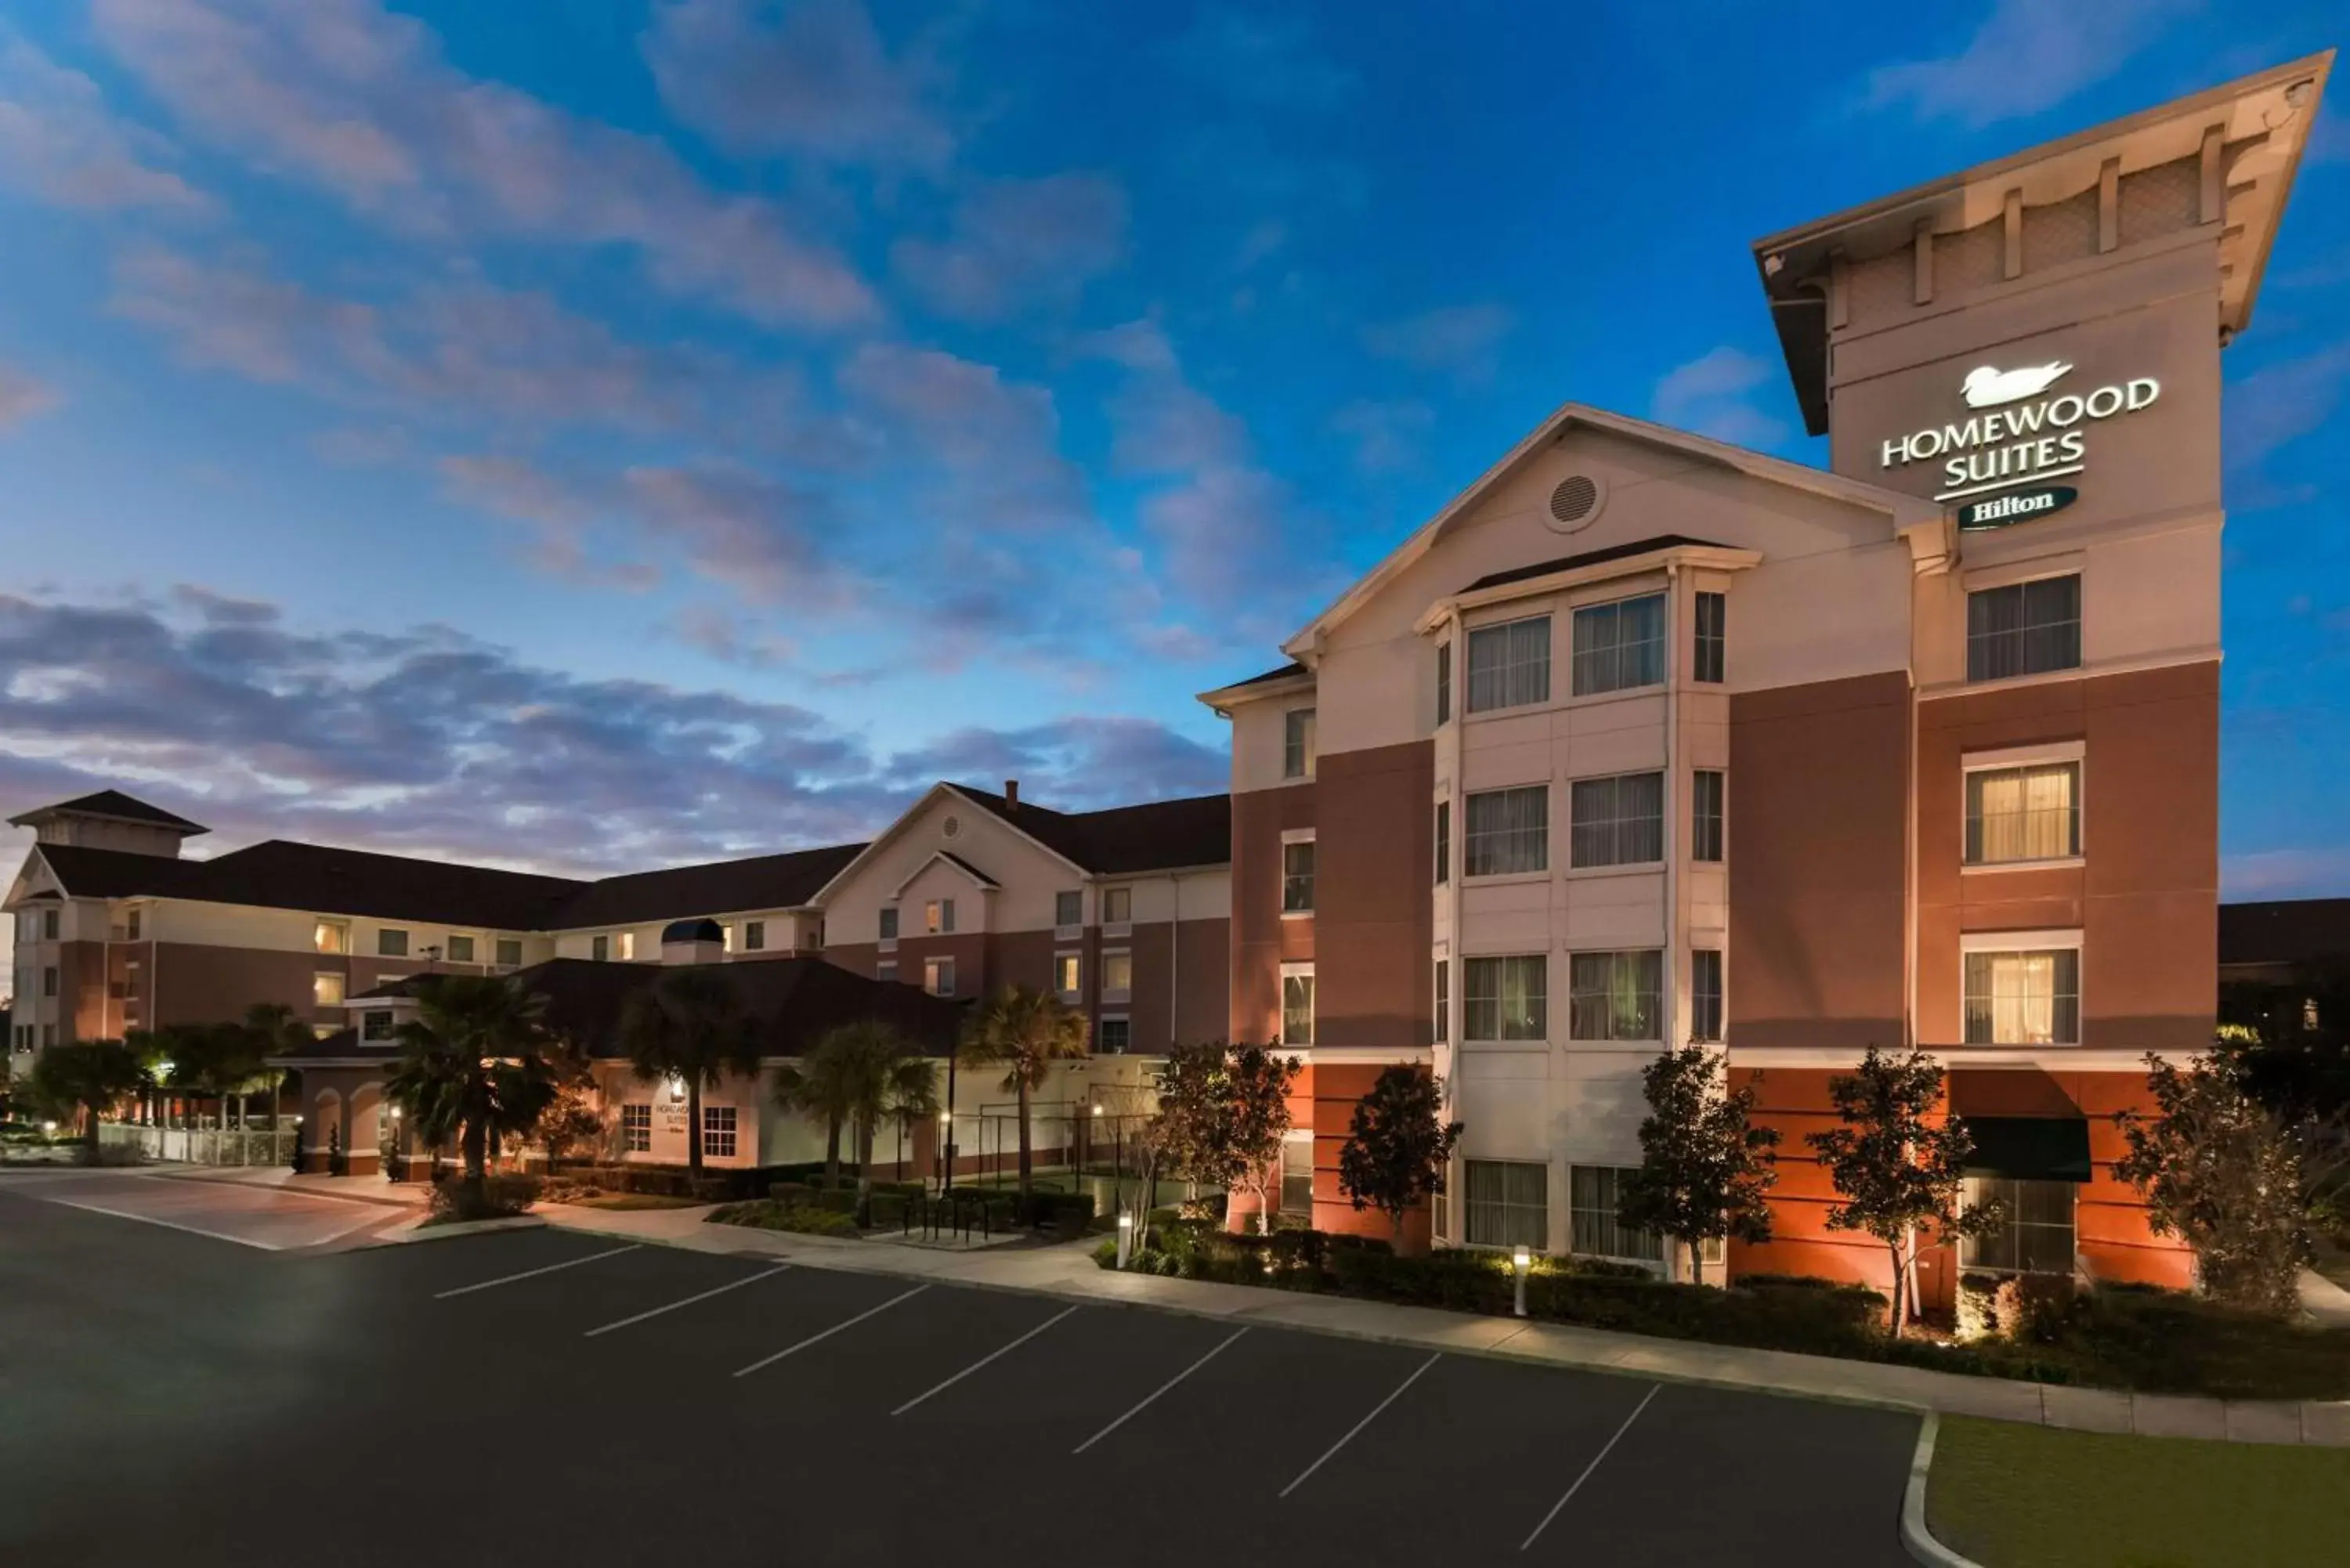 Property Building in Homewood Suites by Hilton Orlando Airport